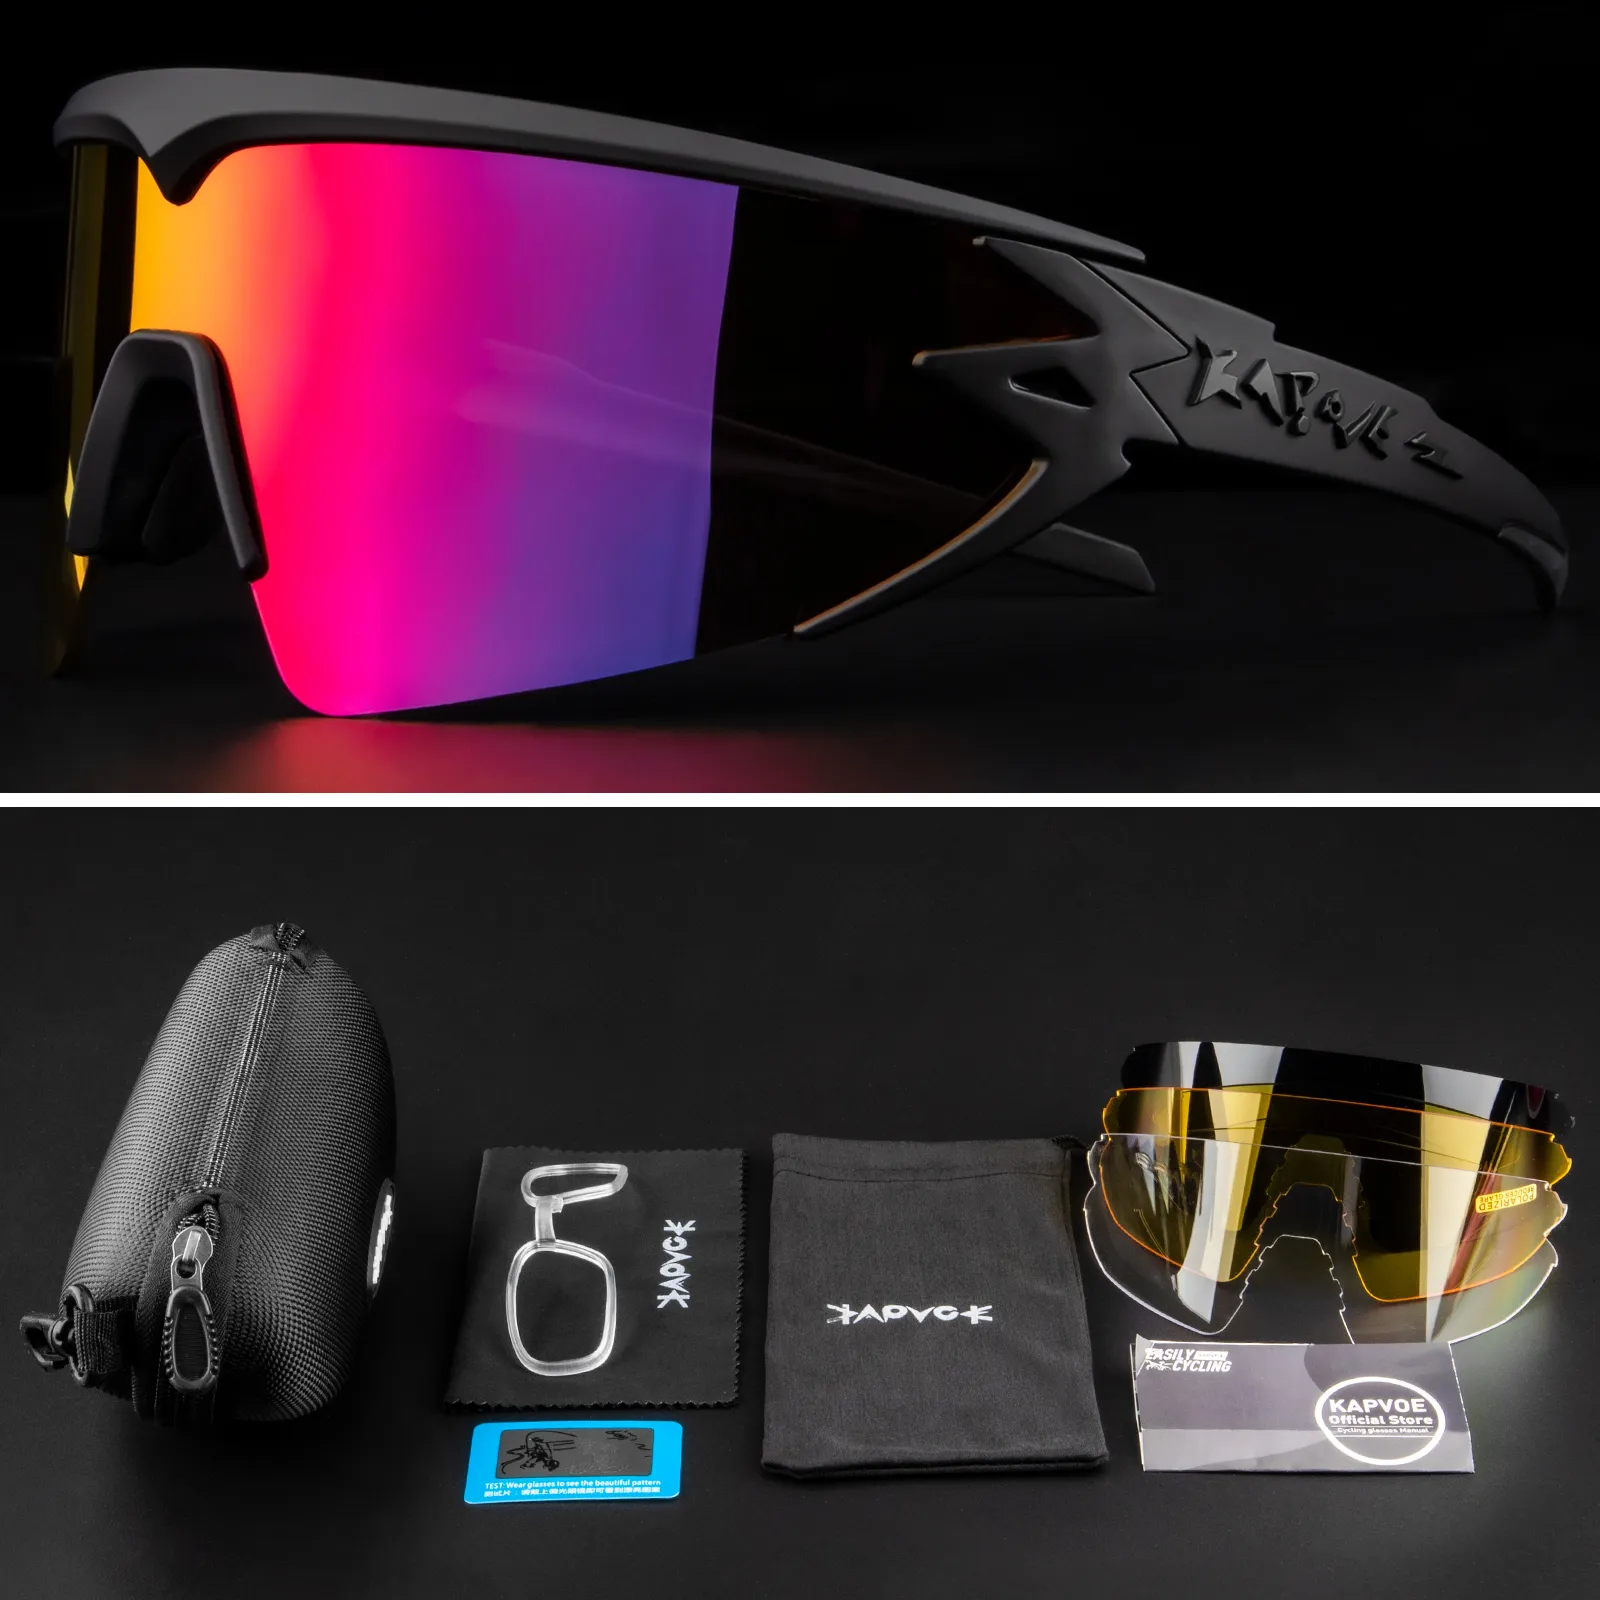 Kapvoe Polarized Best Running Sunglasses For Men And Women Outdoor Mountain  Sport Cycling Glass With 4 Lenses, Mirrored UV400 Protection And Bike Eyewear  Goggles 230325 From Shenping03, $16.65